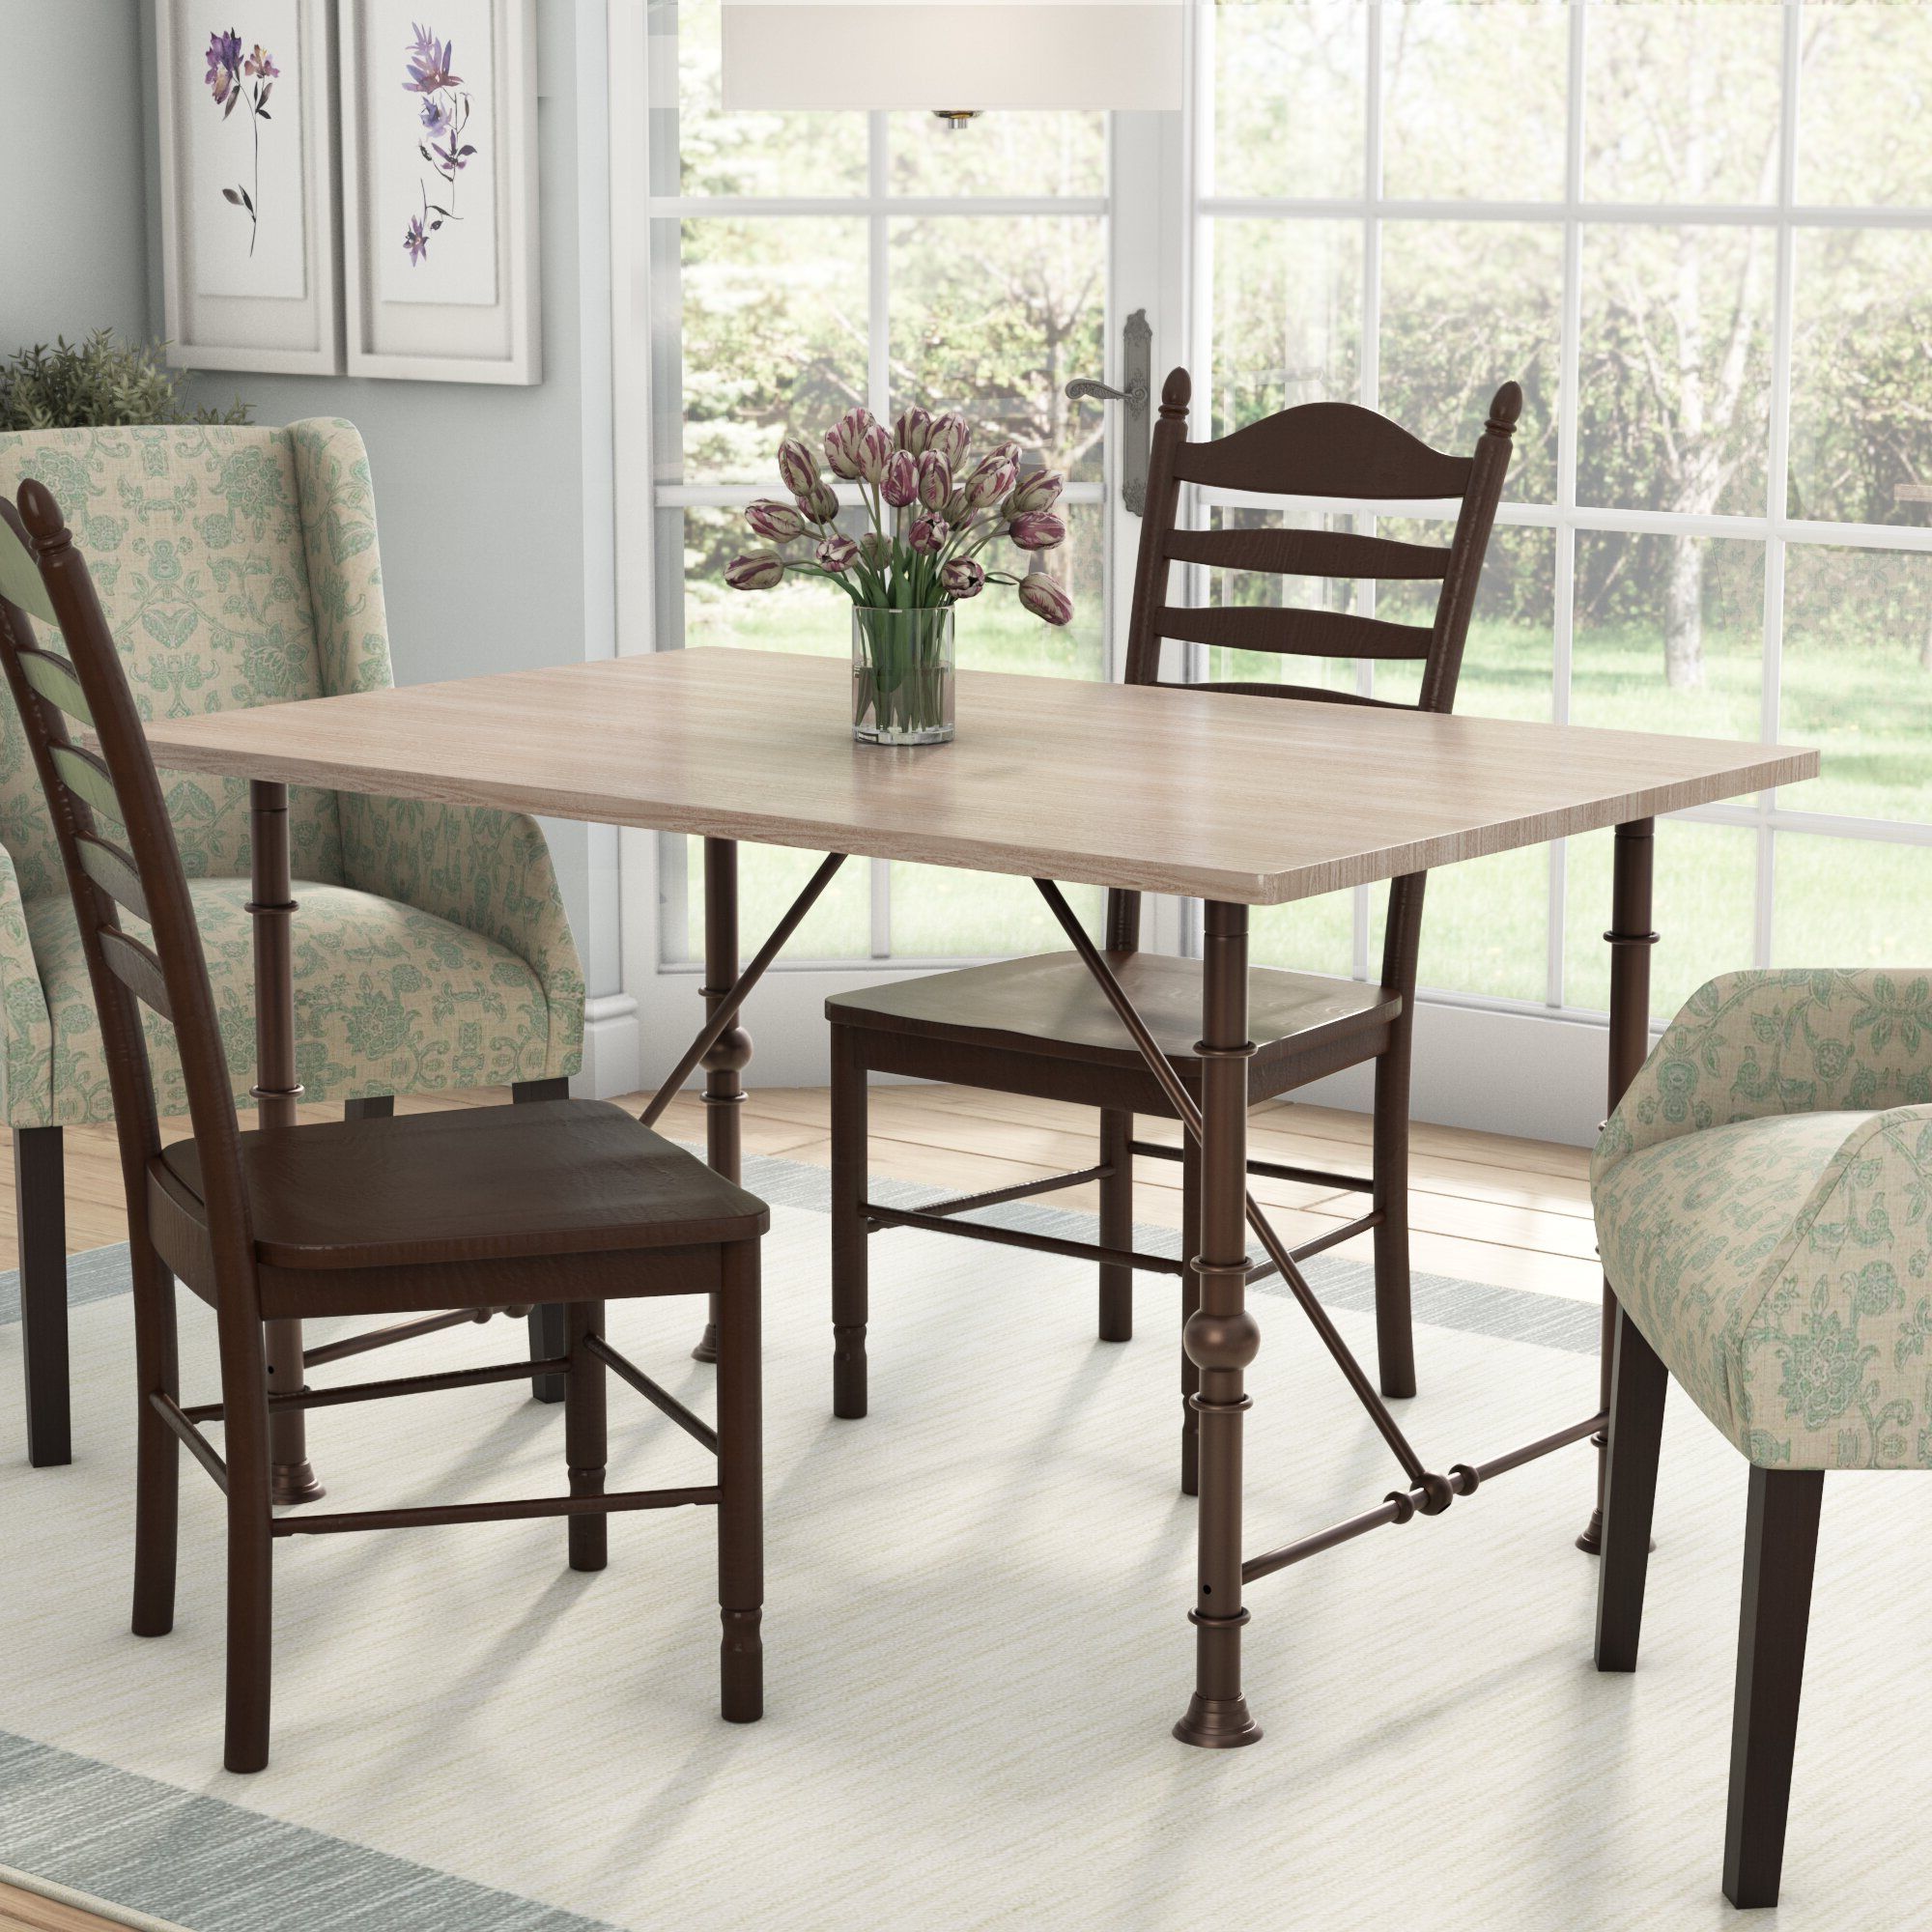 Avery Round Dining Tables Regarding Most Popular Avery Dining Table (View 25 of 25)